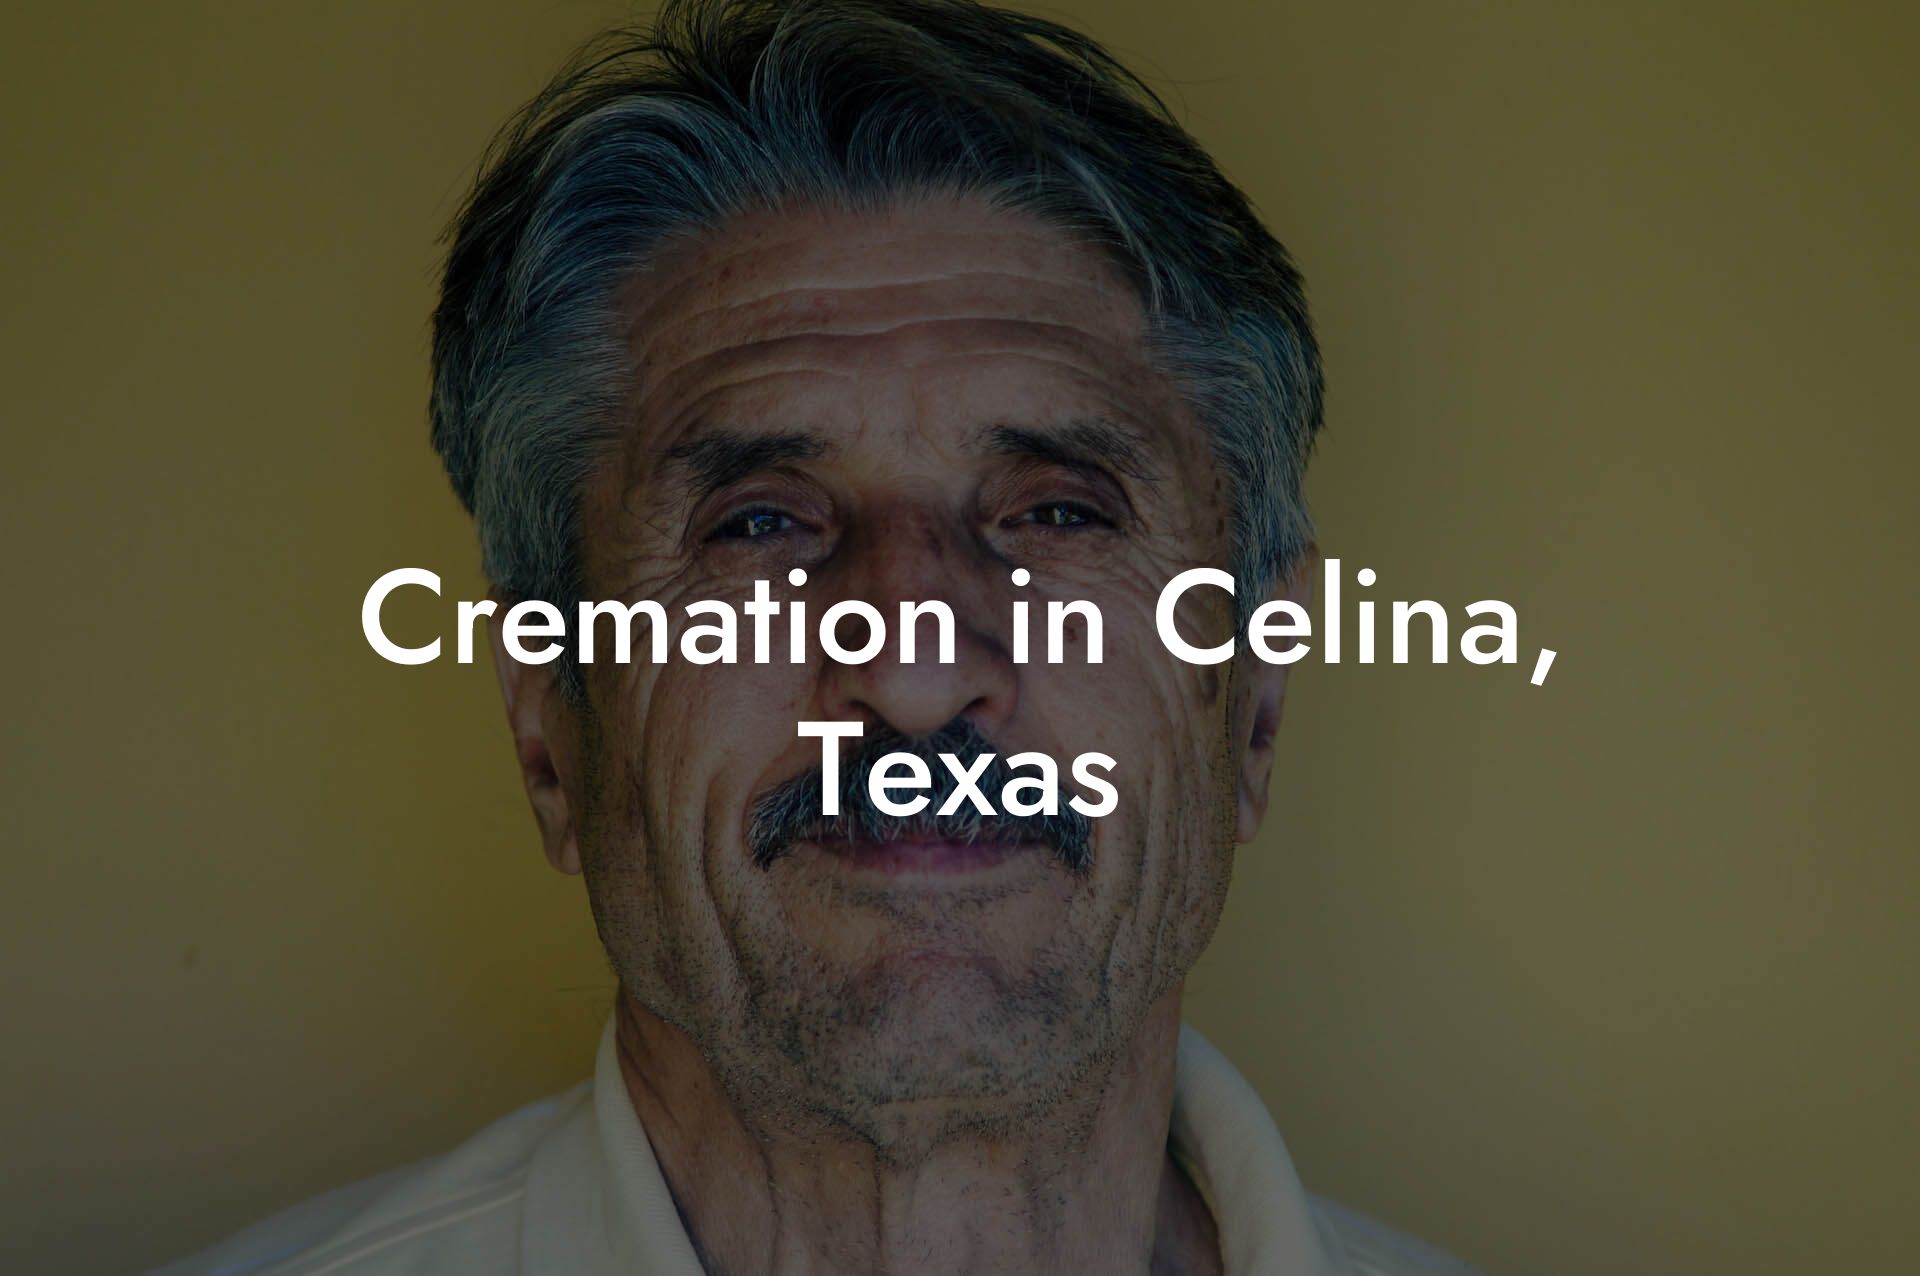 Cremation in Celina, Texas